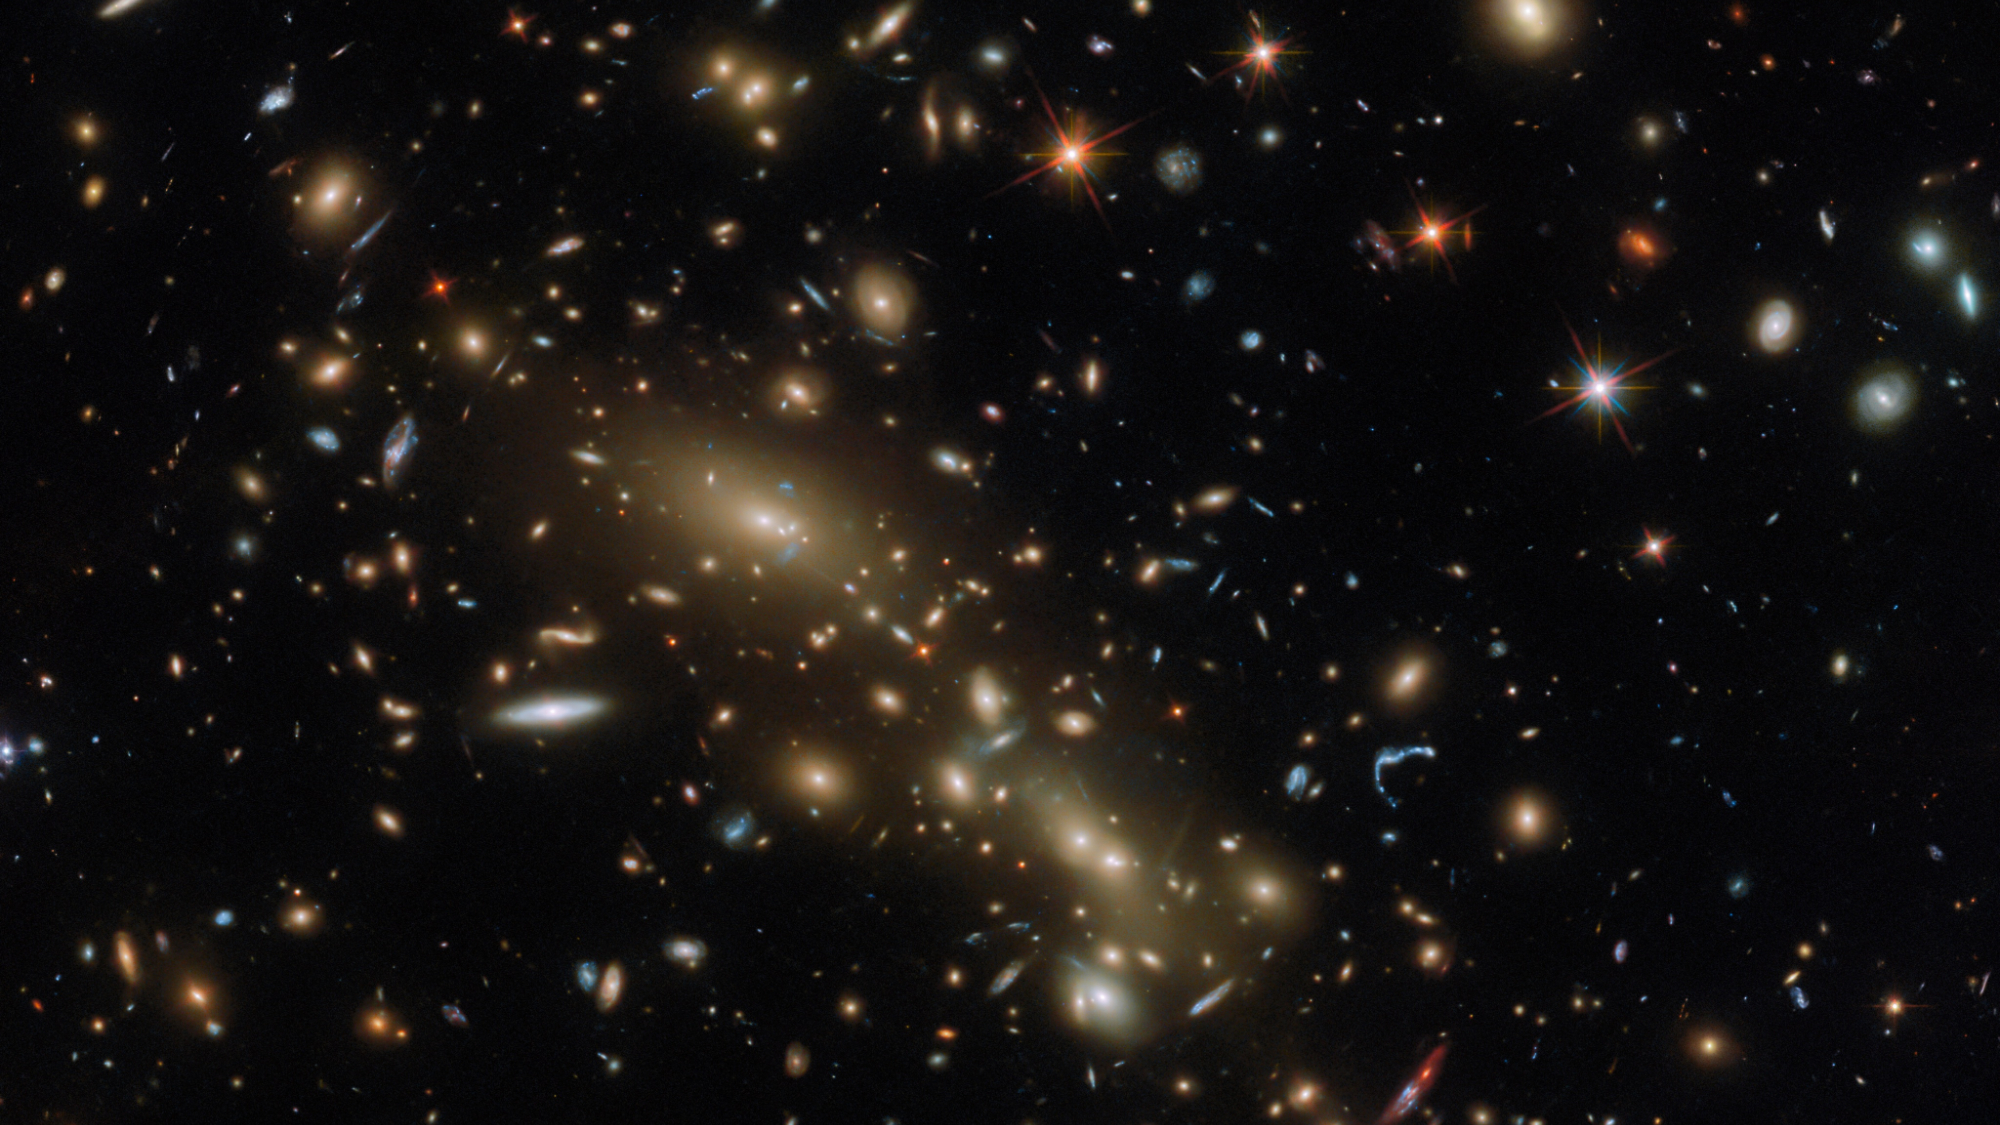 Hubble Space Telescope spies multiple galaxy clusters masquerading as one (image) Space